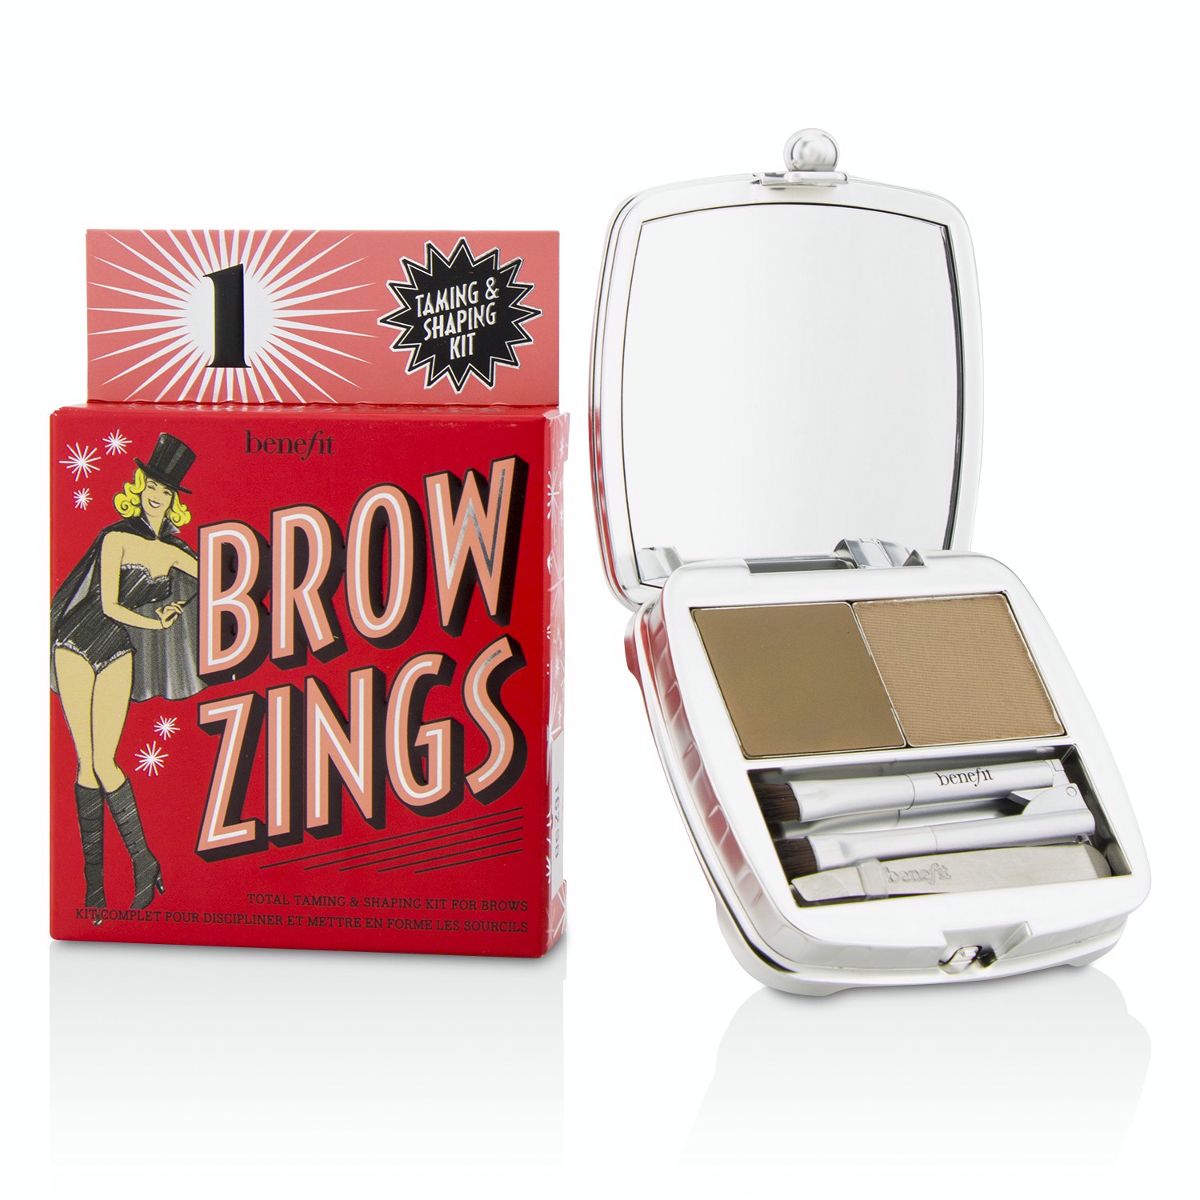 Brow Zings (Total Taming  Shaping Kit For Brows) - #1 (Light) Benefit Image